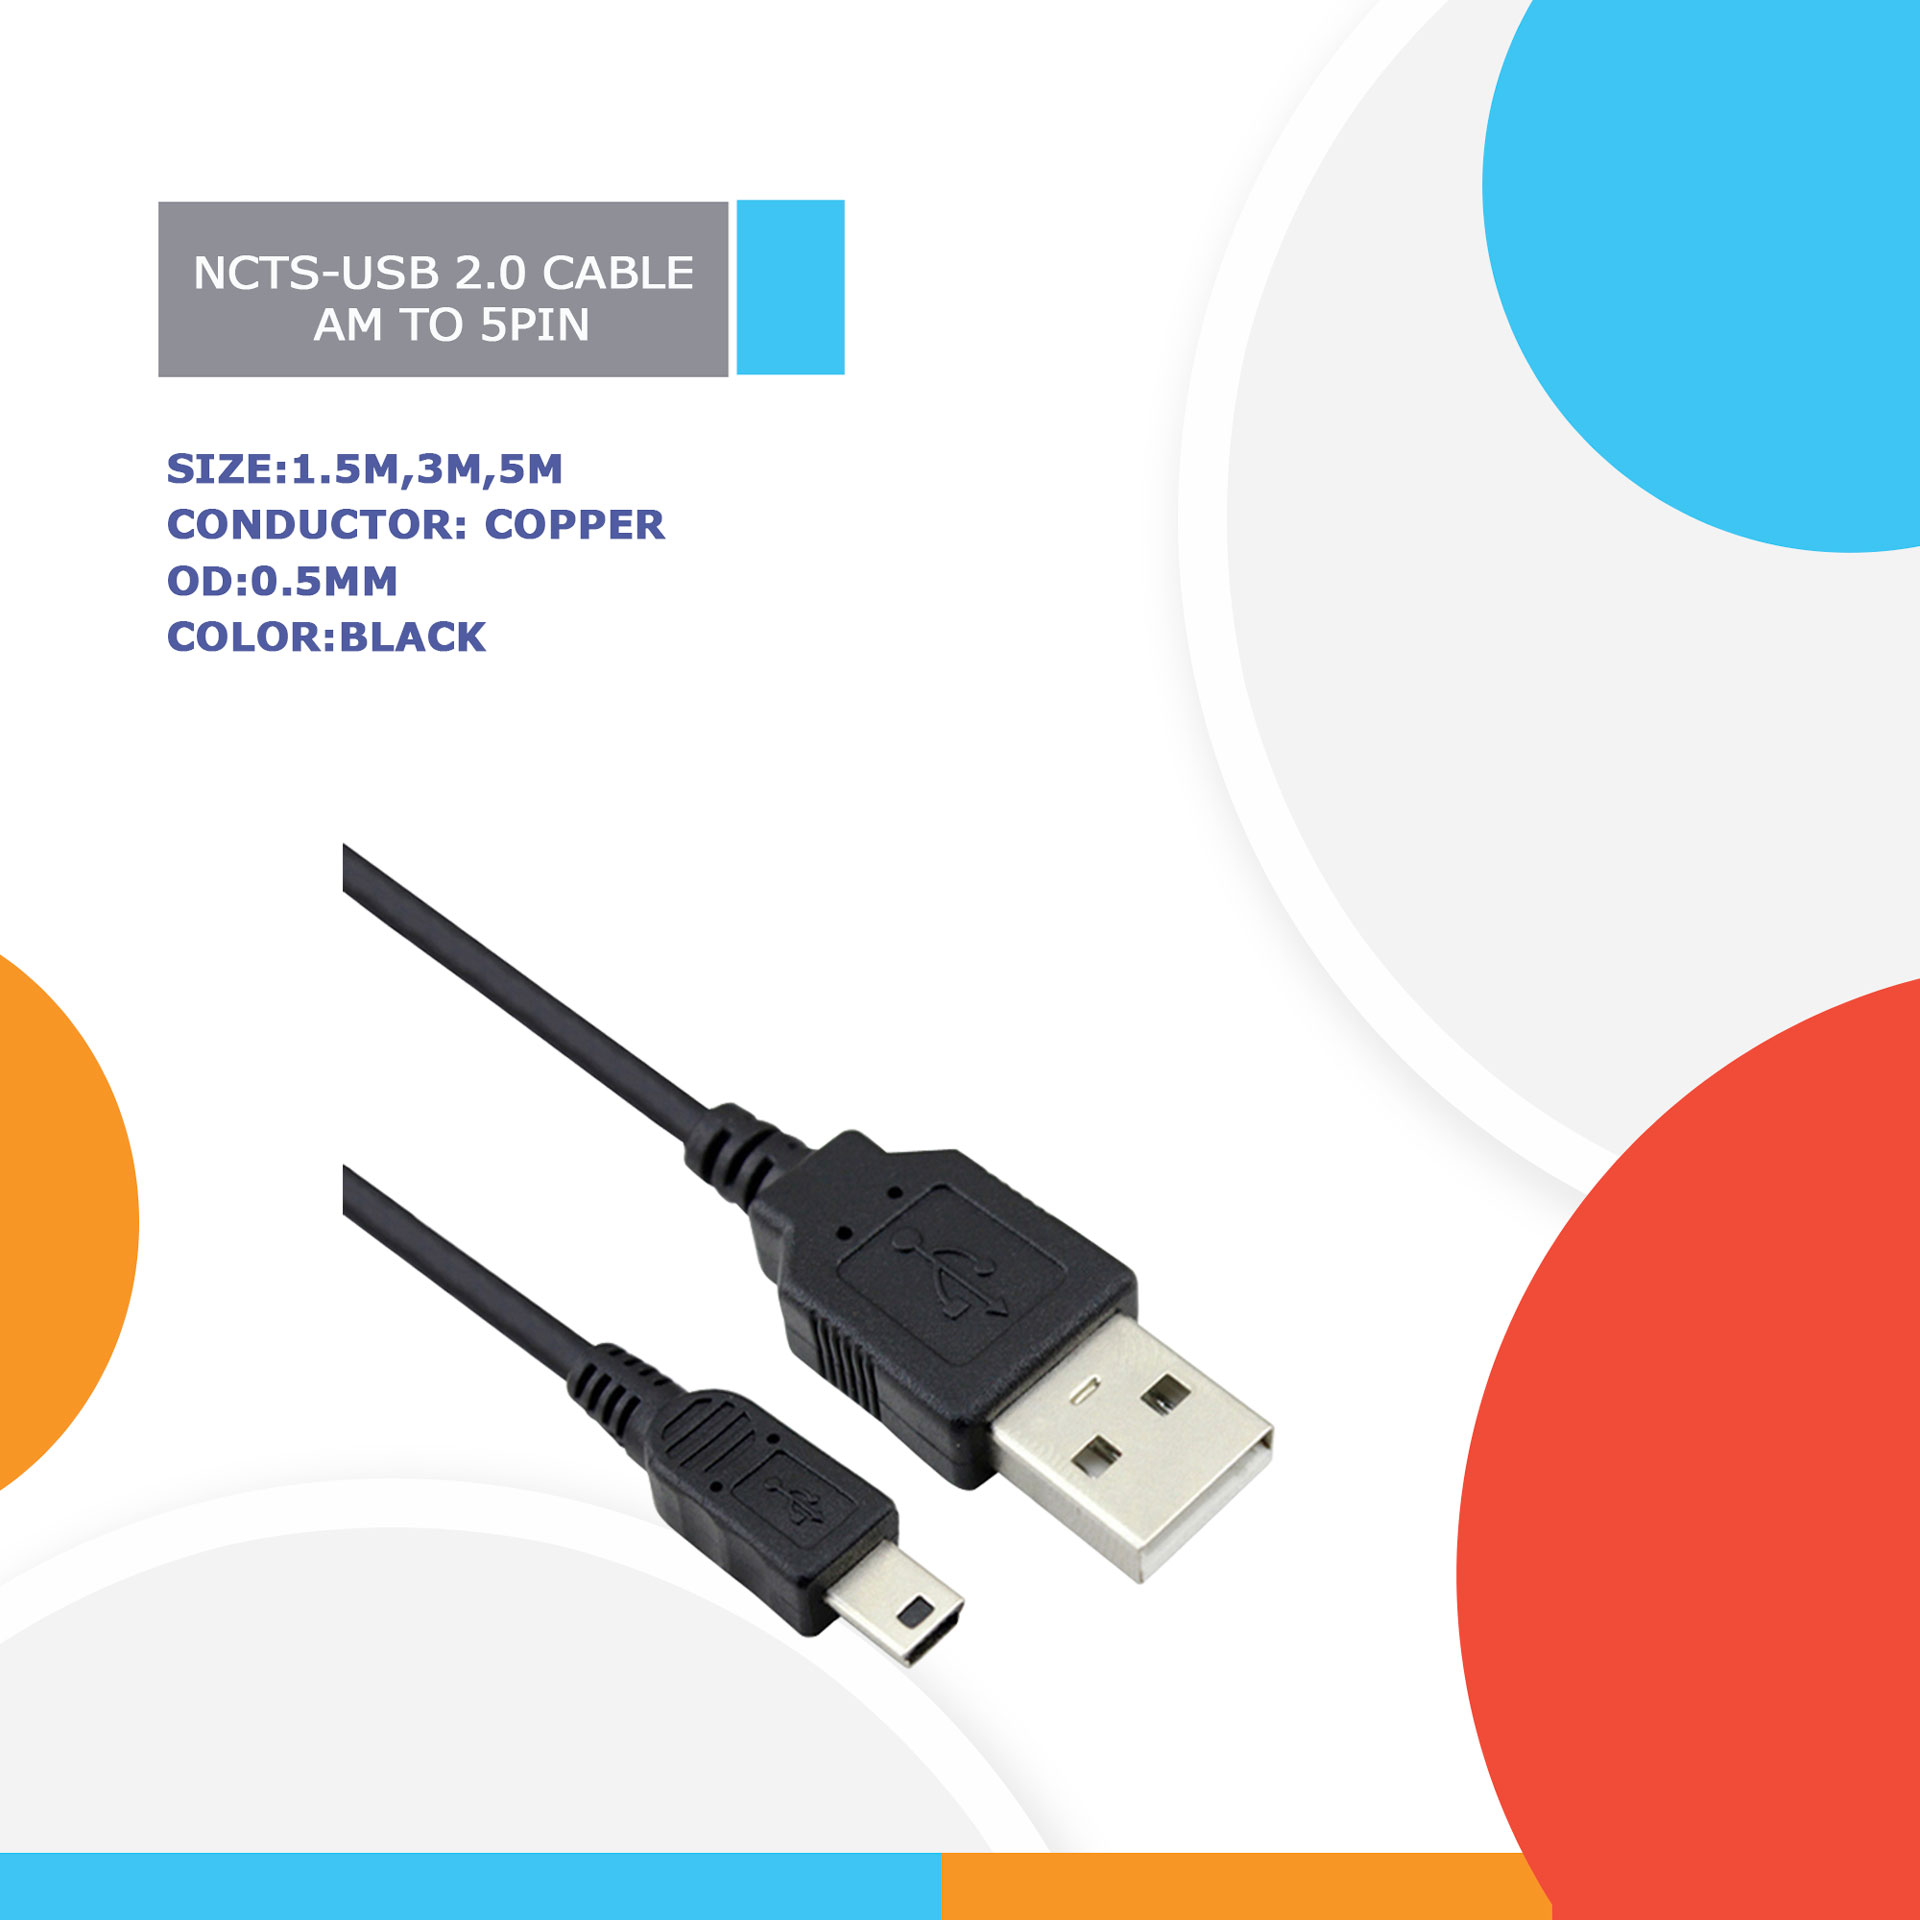 NCTS USB 2.0 CABLE AM TO 5PIN